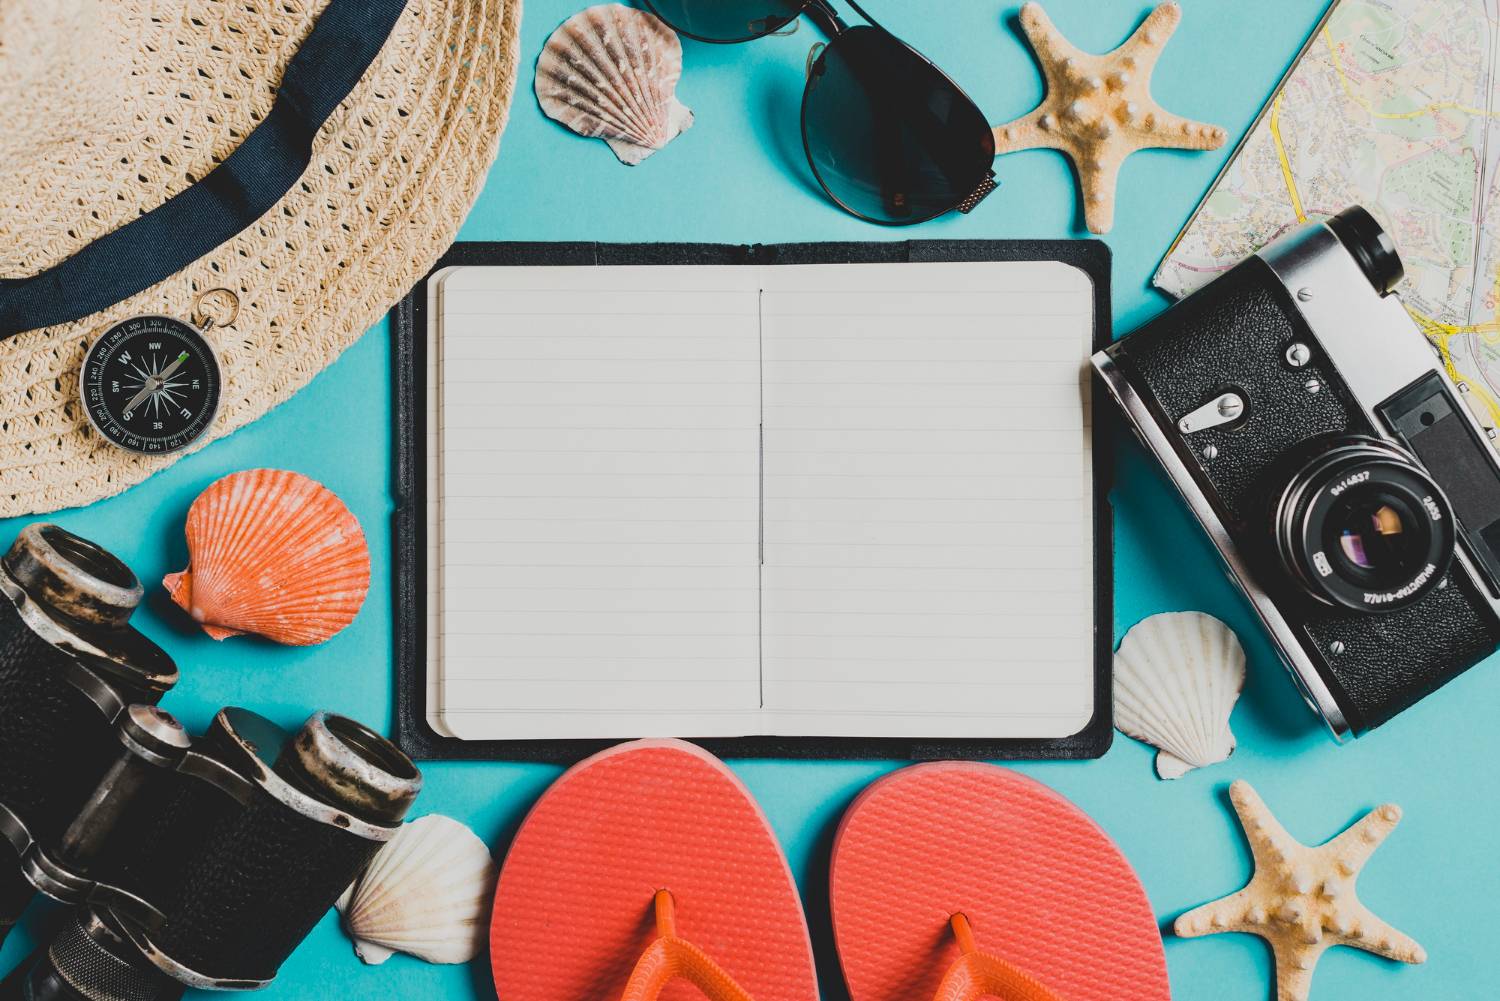 A summer travel setup featuring a straw hat, compass, camera, sunglasses, flip-flops, seashells, starfish, and an open notebook on a blue background.